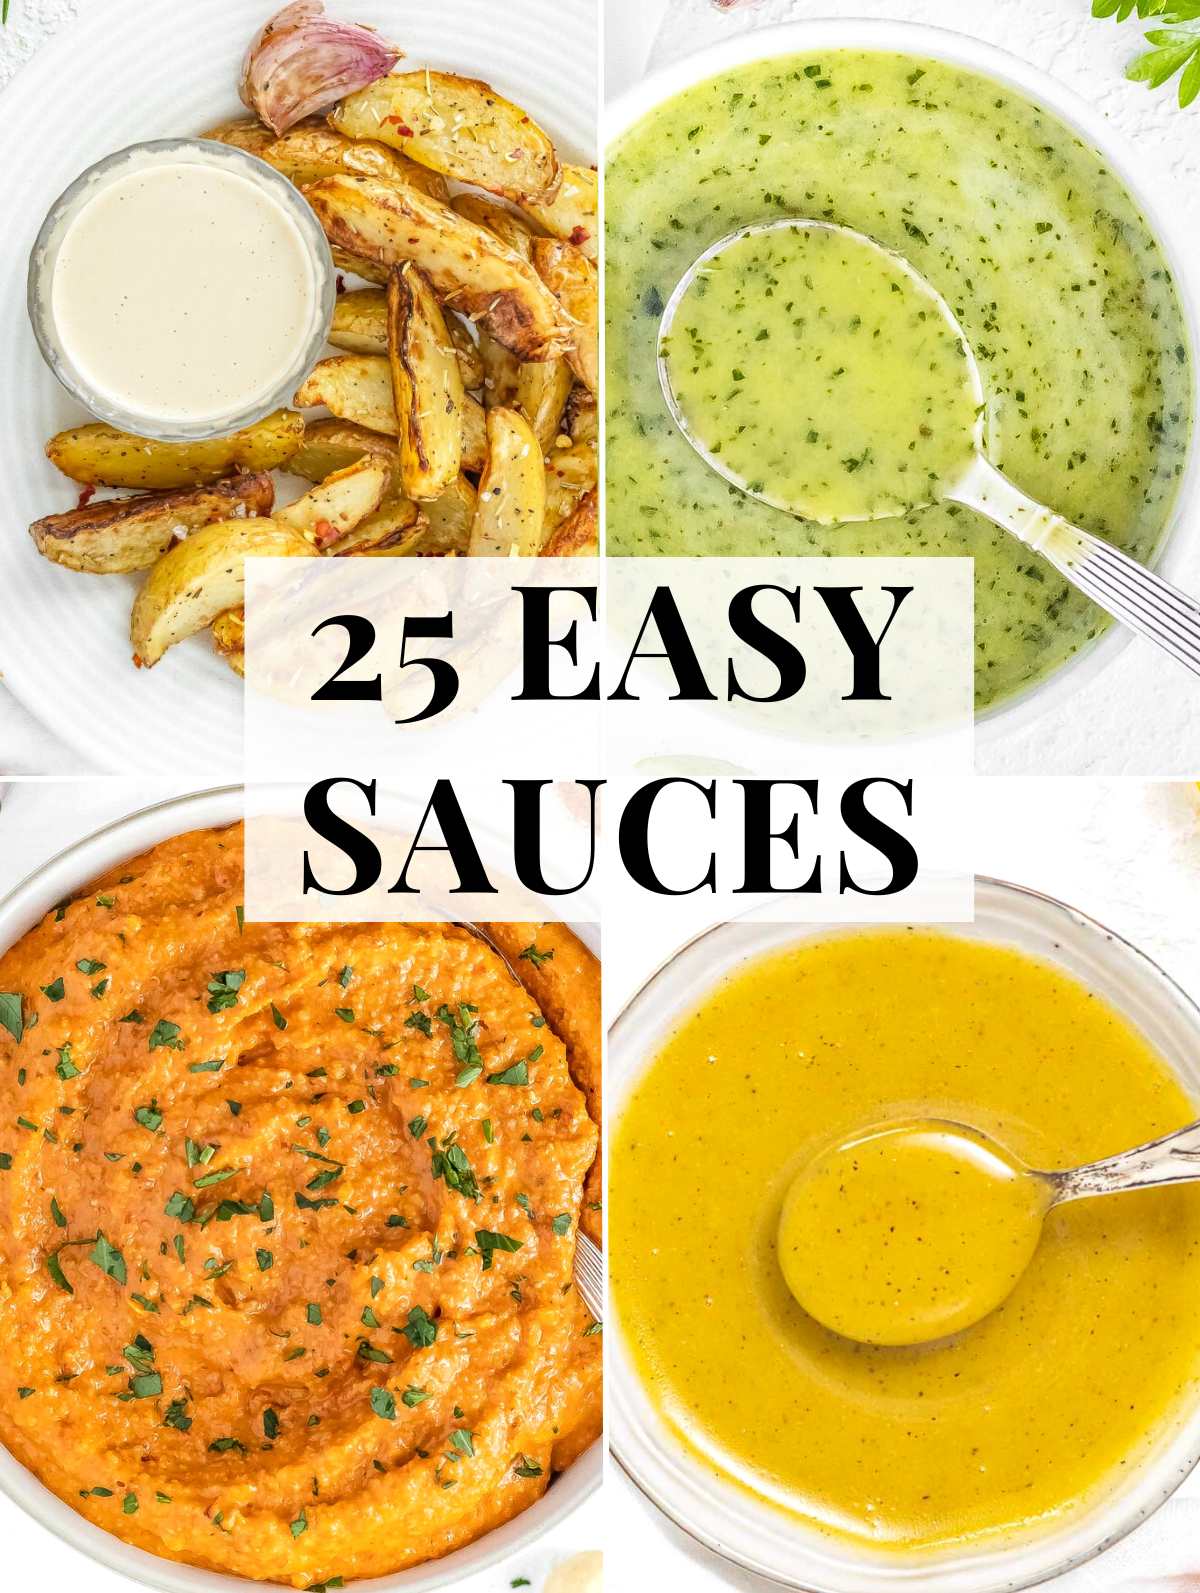 Easy sauce recipes for pasta, salads and vegetables